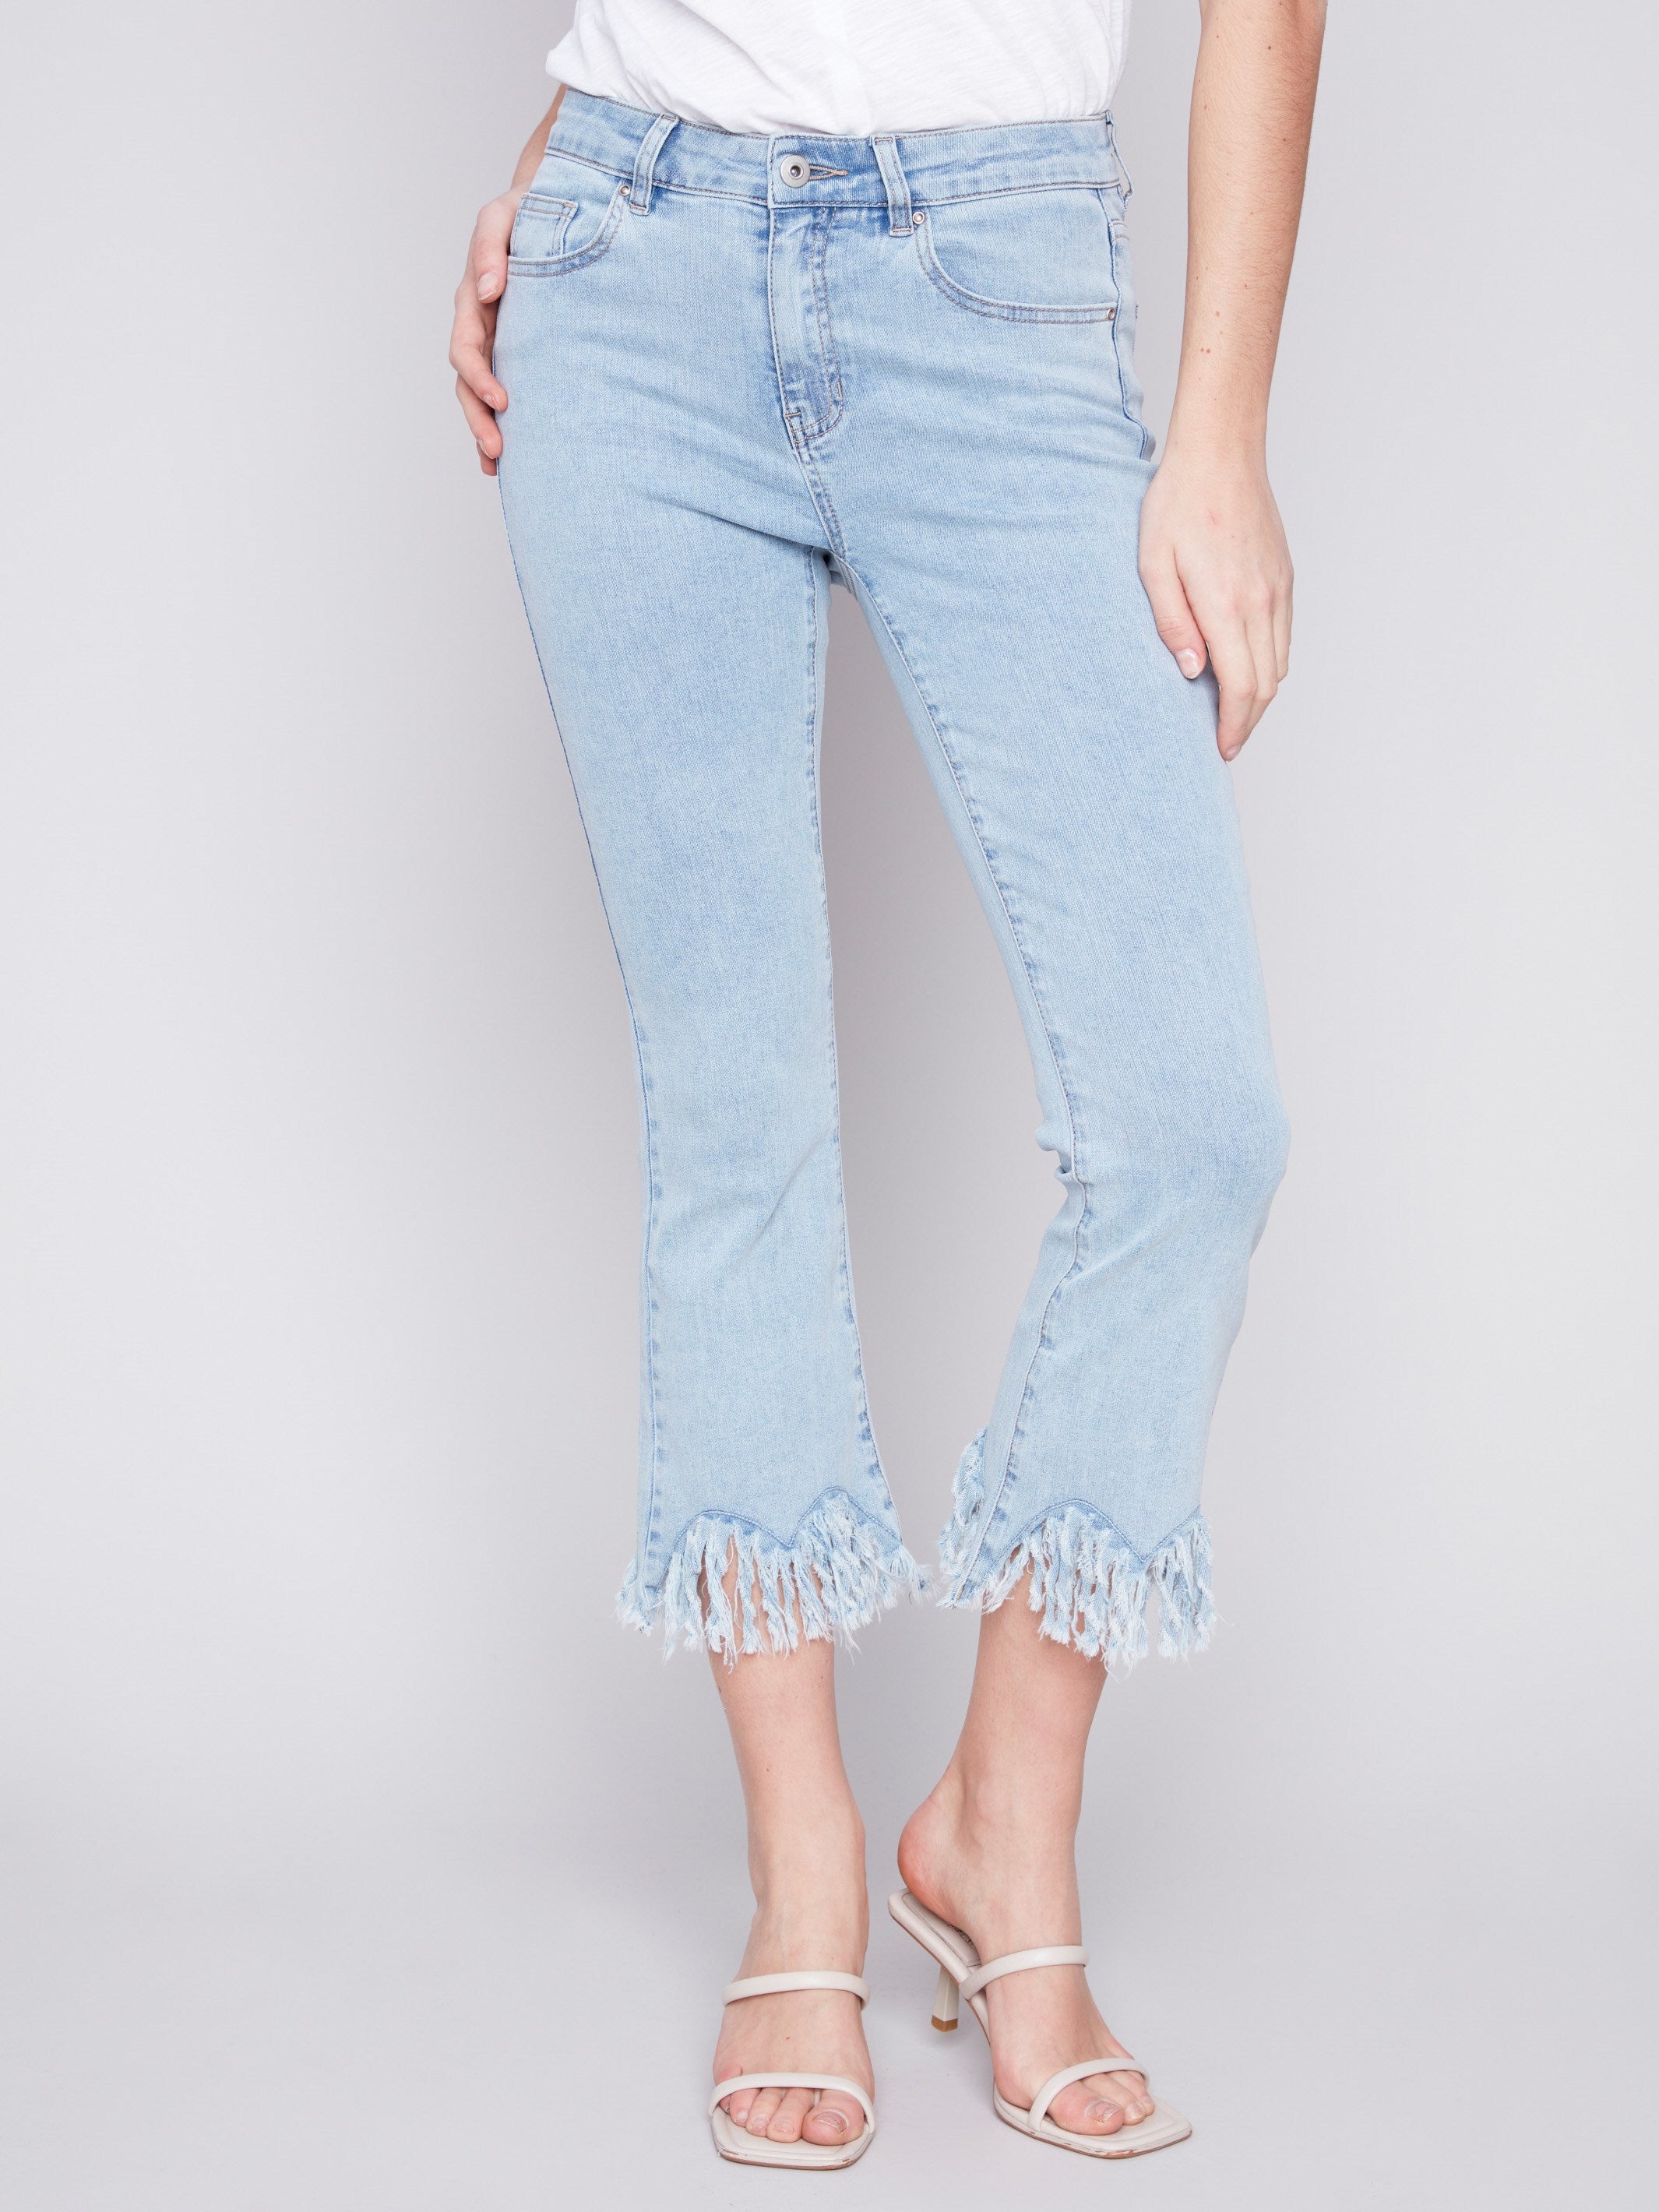 Cropped Jeans with Fringed Hem - Bleach Blue - Charlie B Collection Canada - Image 2